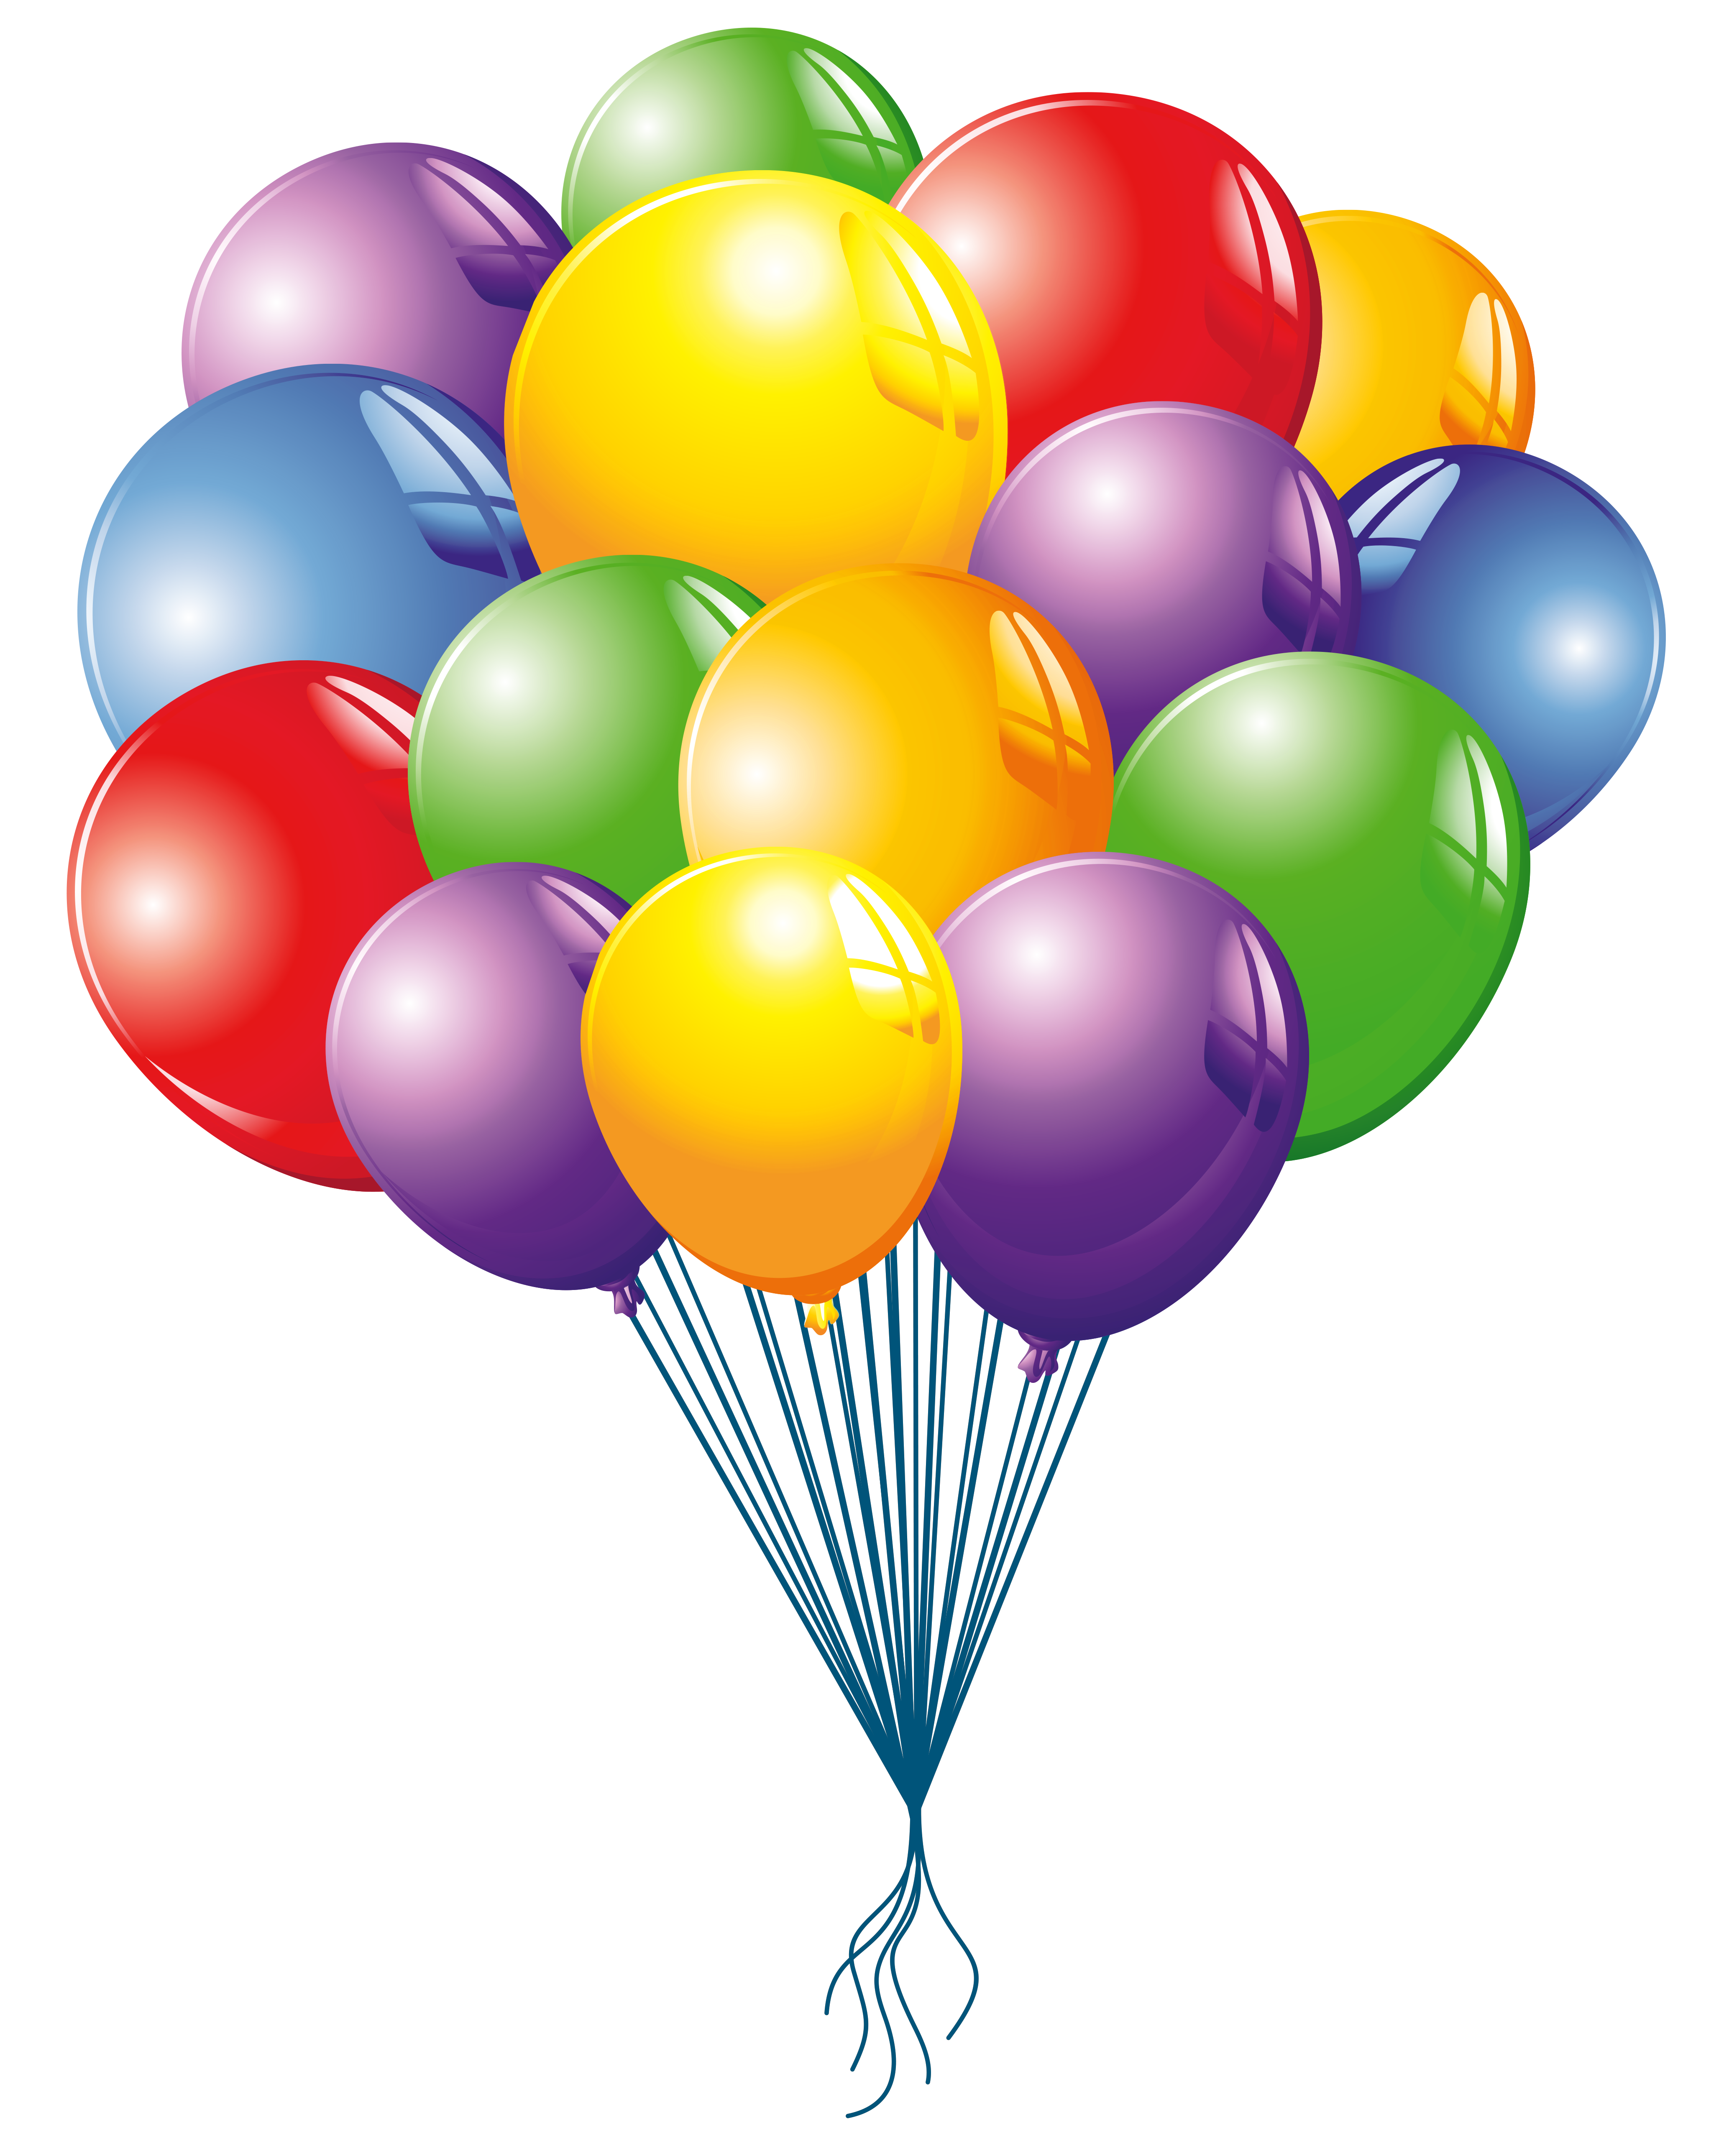 Ballons clipart - Clipground